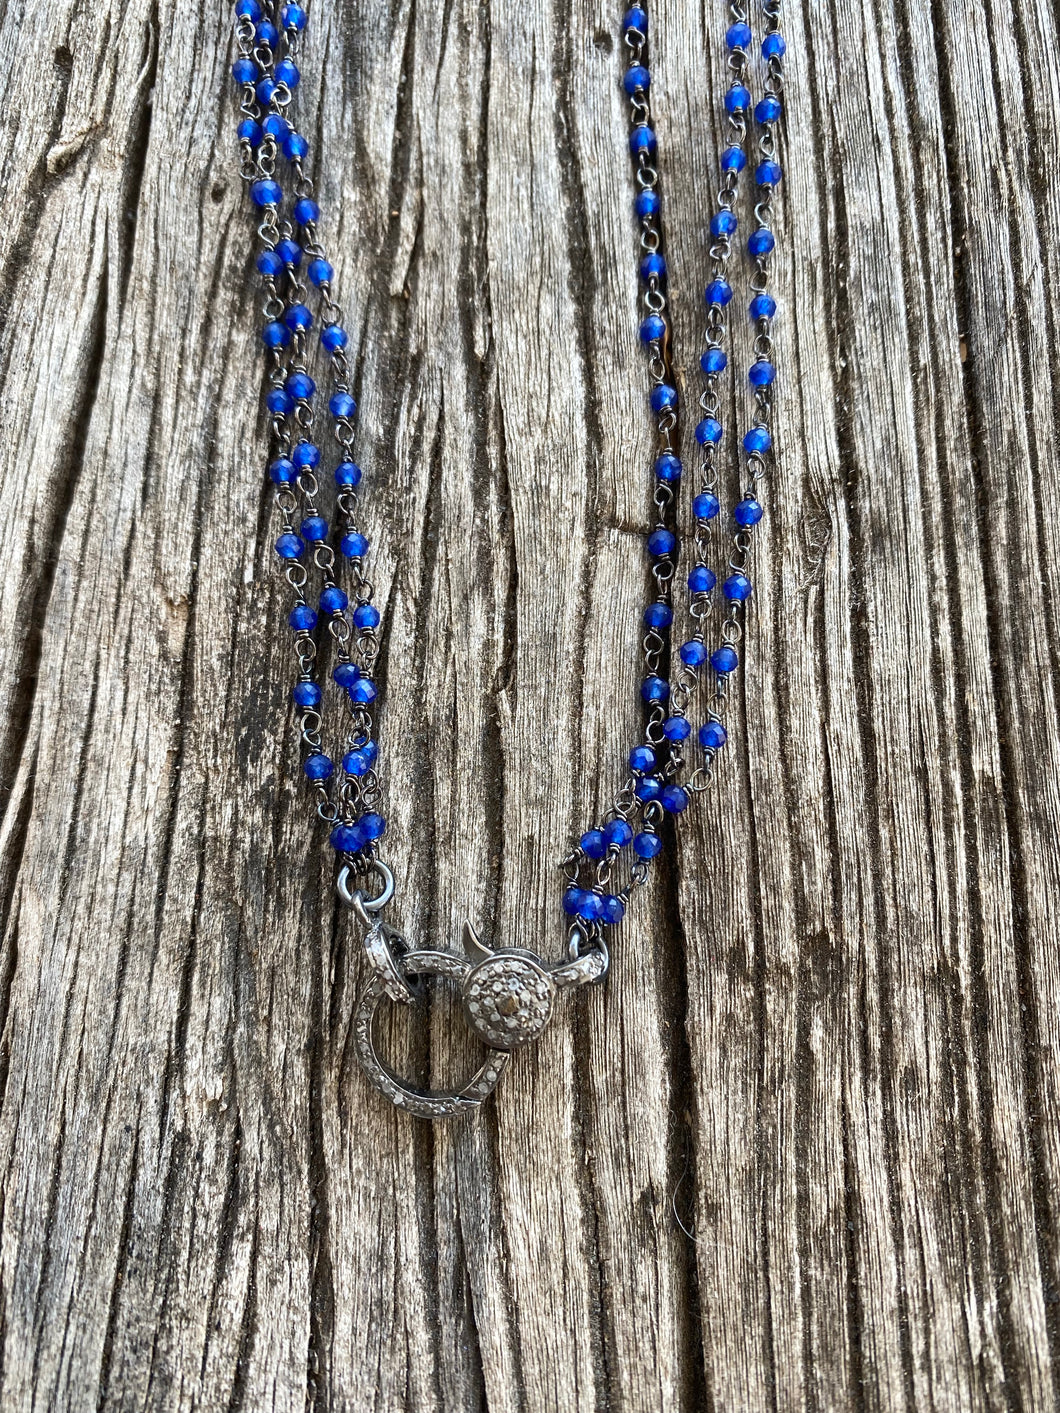 Triple Strand Blue Beaded Necklace with Pave Diamond Clasp.